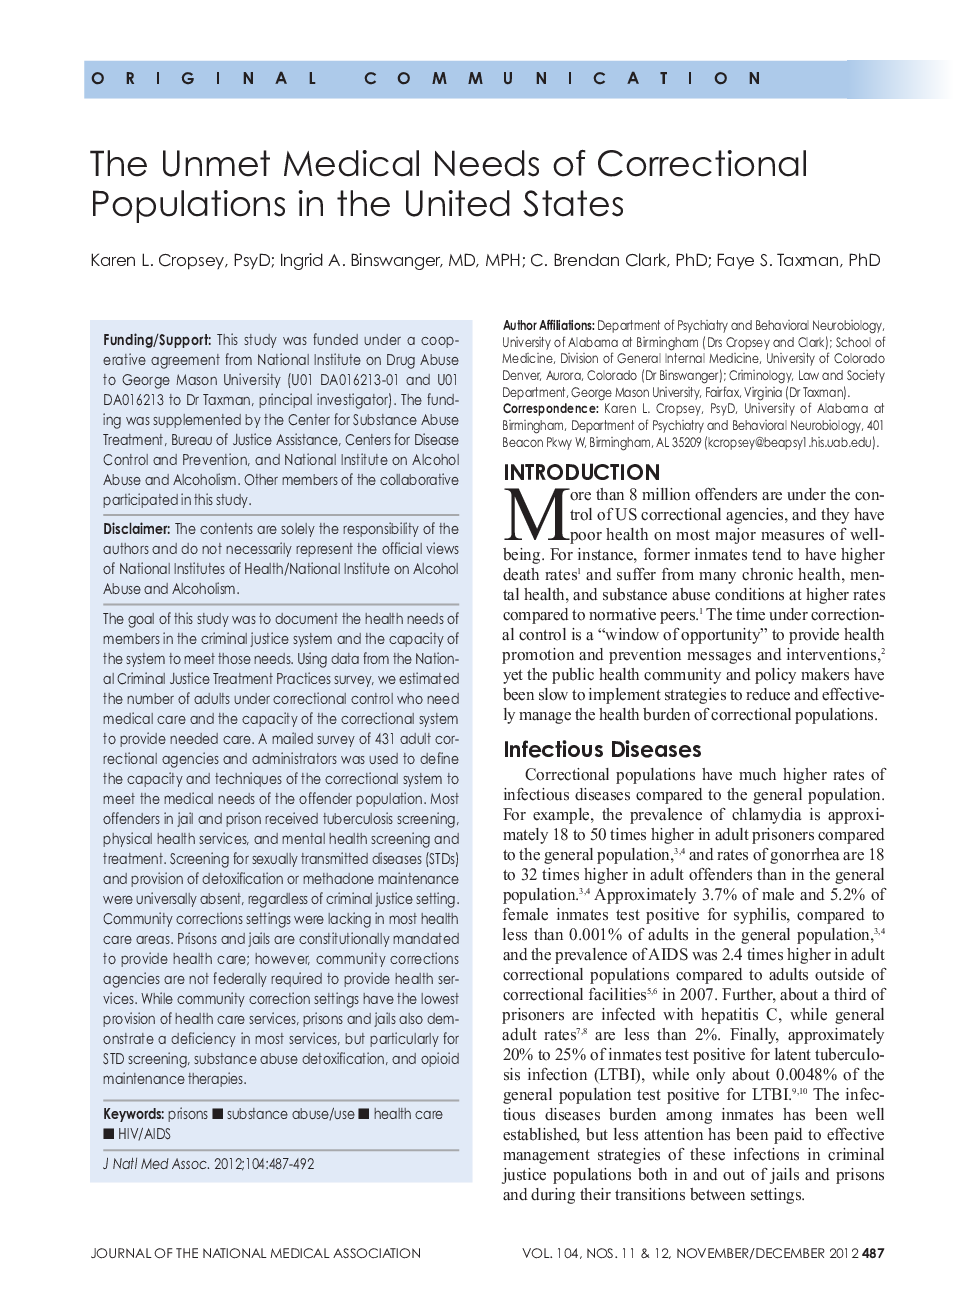 The Unmet Medical Needs of Correctional Populations in the United States